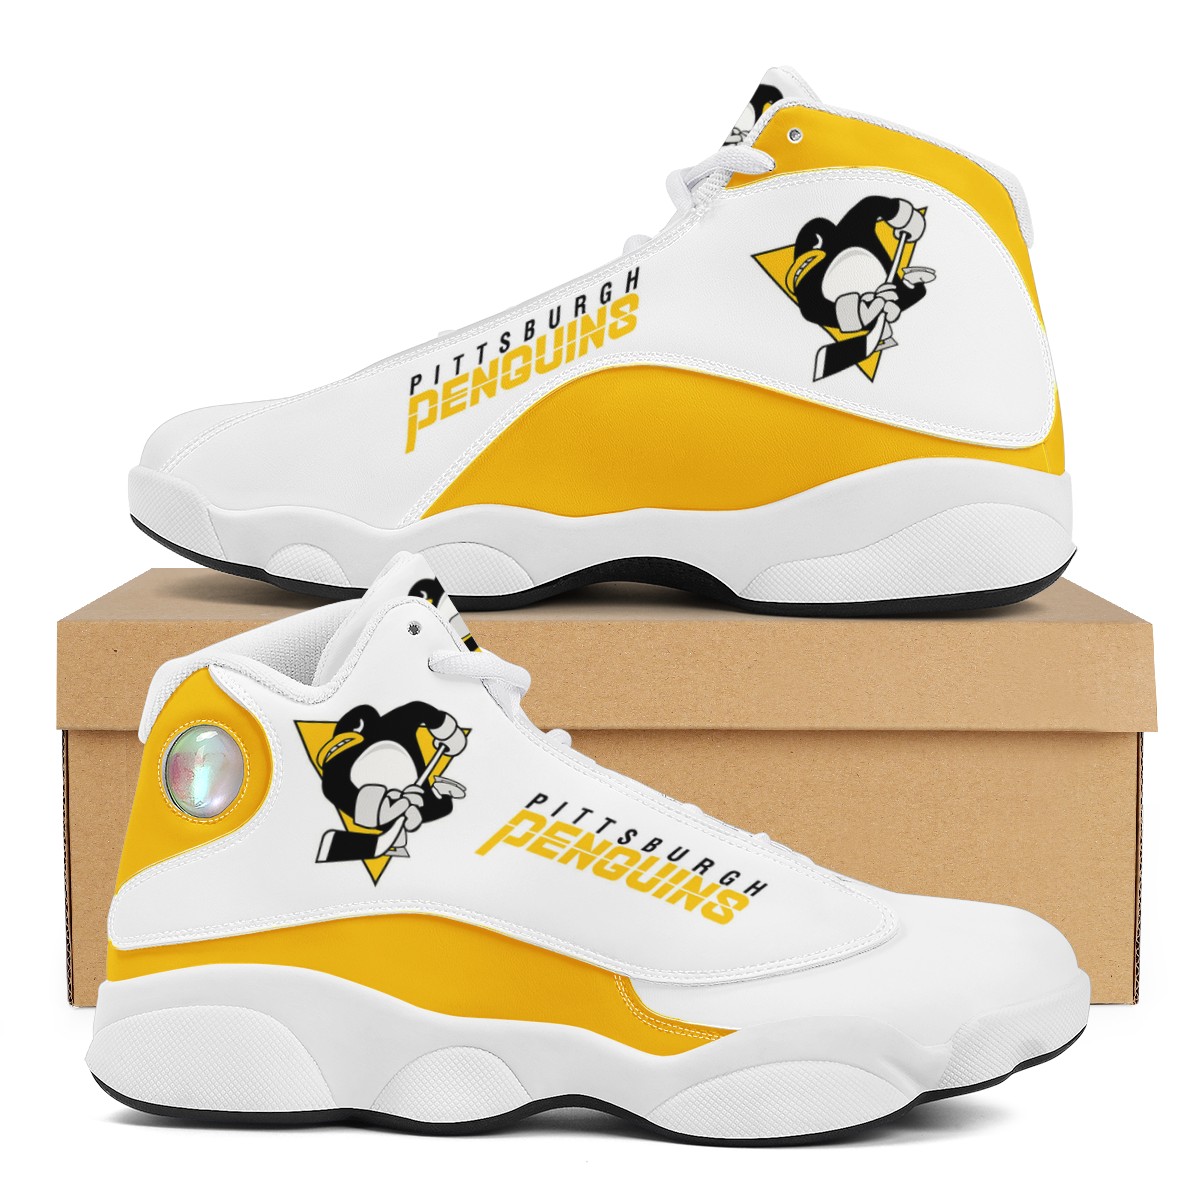 Women's Pittsburgh Penguins Limited Edition JD13 Sneakers 001